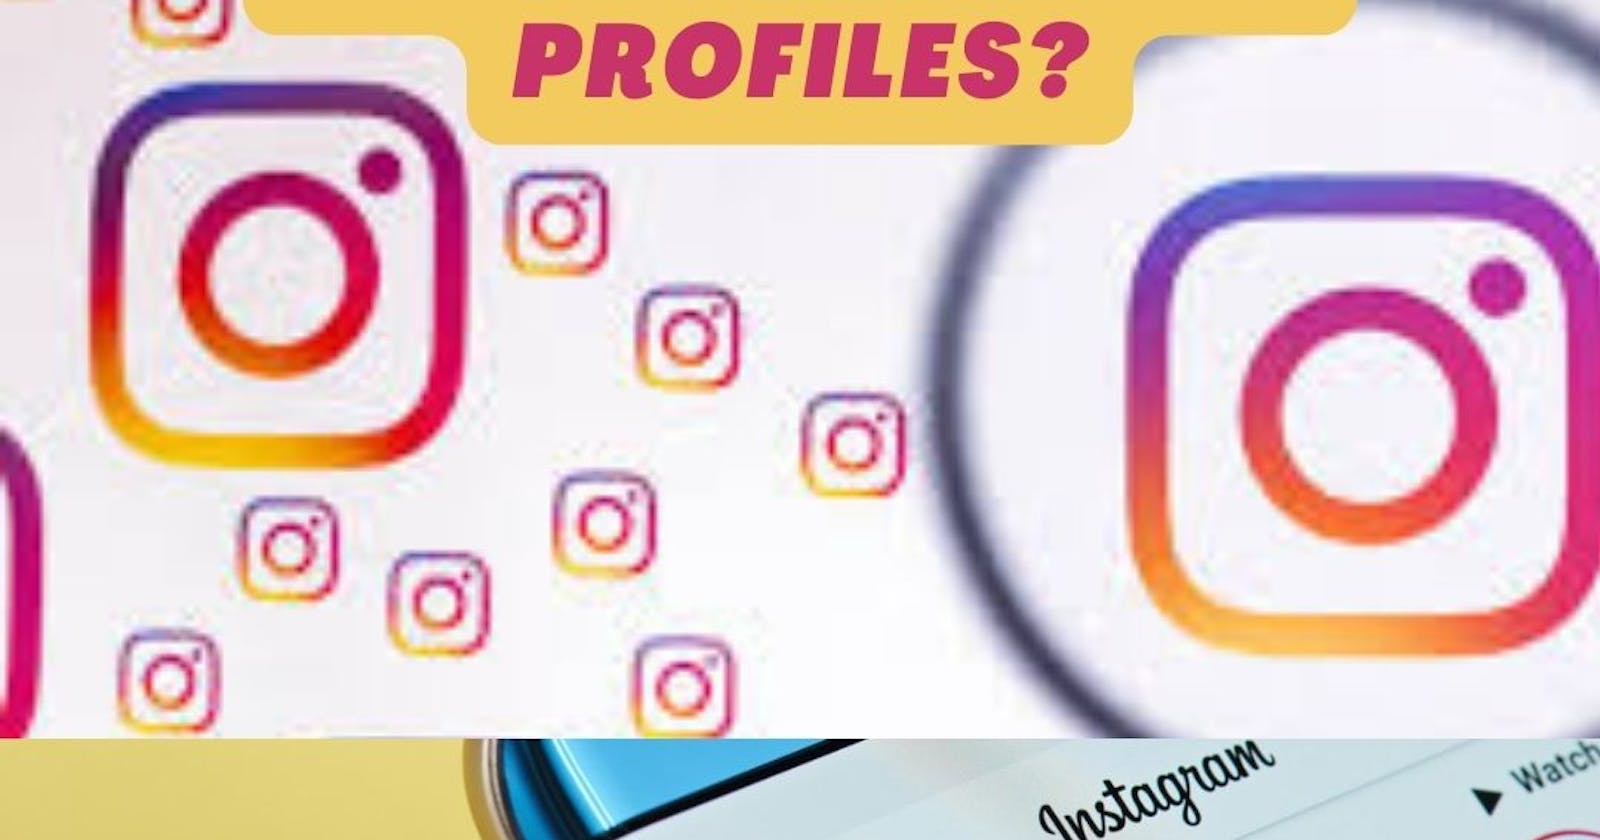 How To Extract Emails From Instagram Profiles?